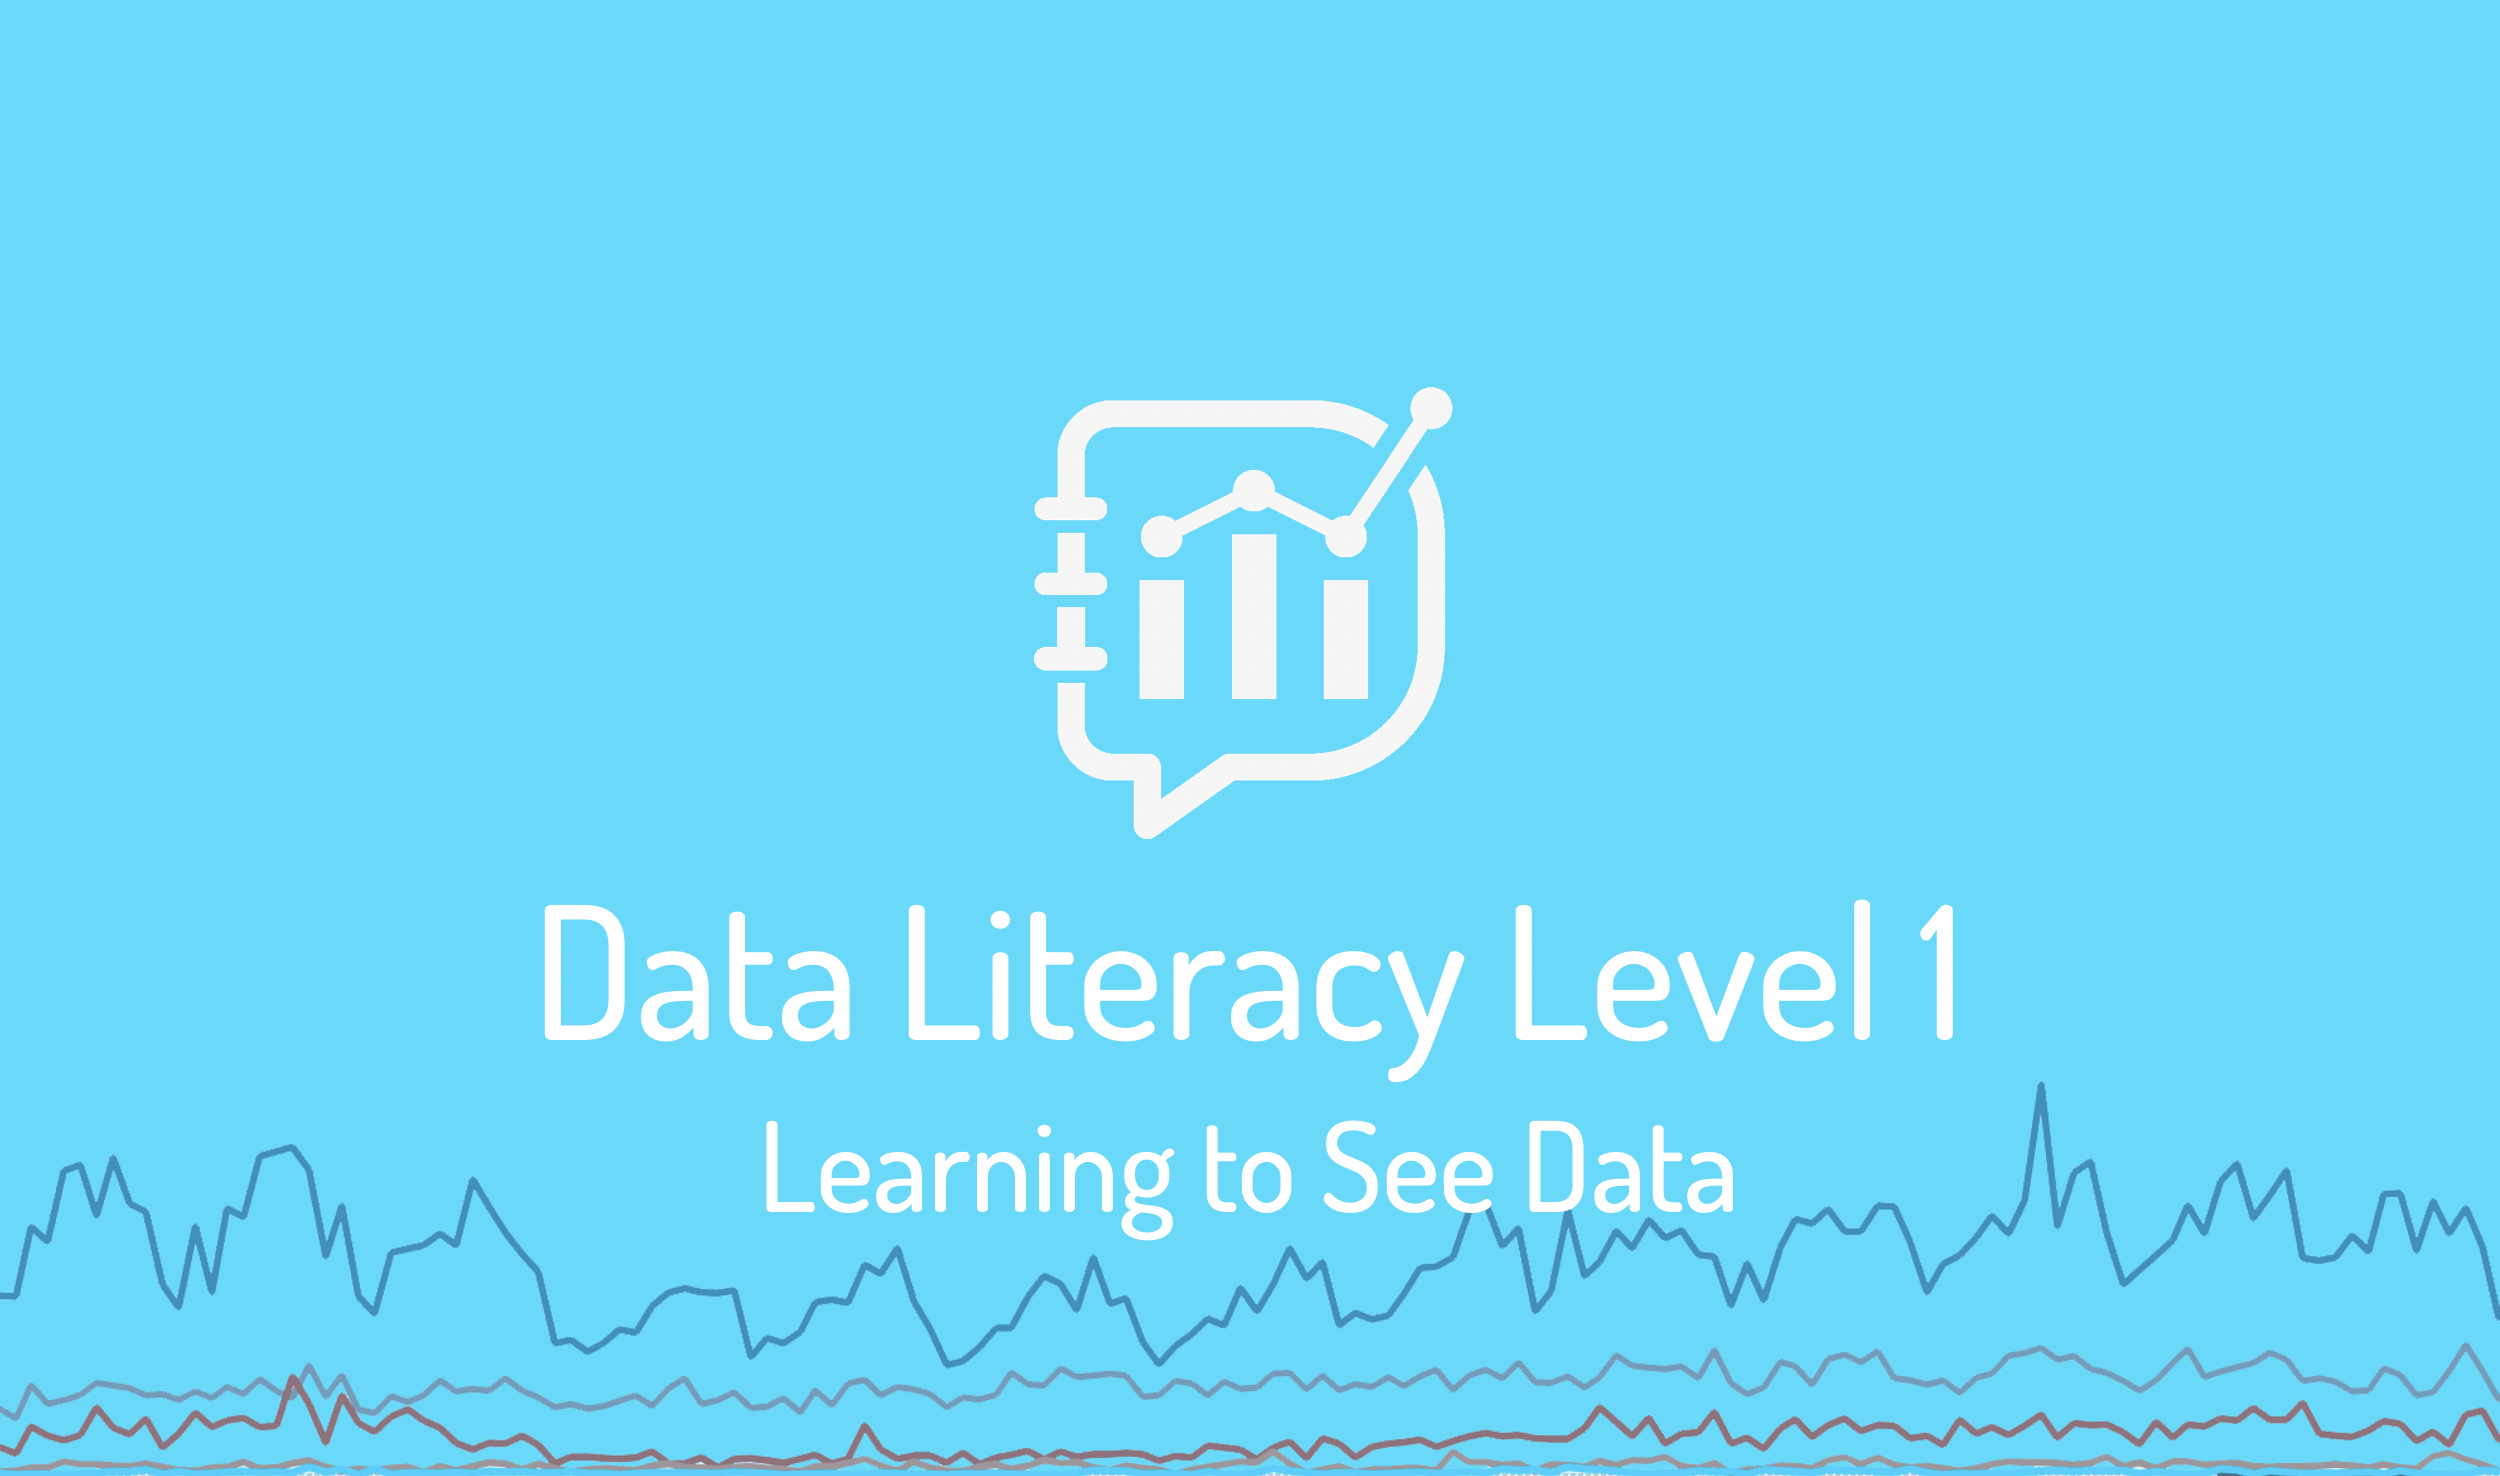 Featured image for the data literacy level 1 on-demand course. Light background with line chart. White data literacy logo. Beneath in white text it reads data literacy level 1 learning to see data.